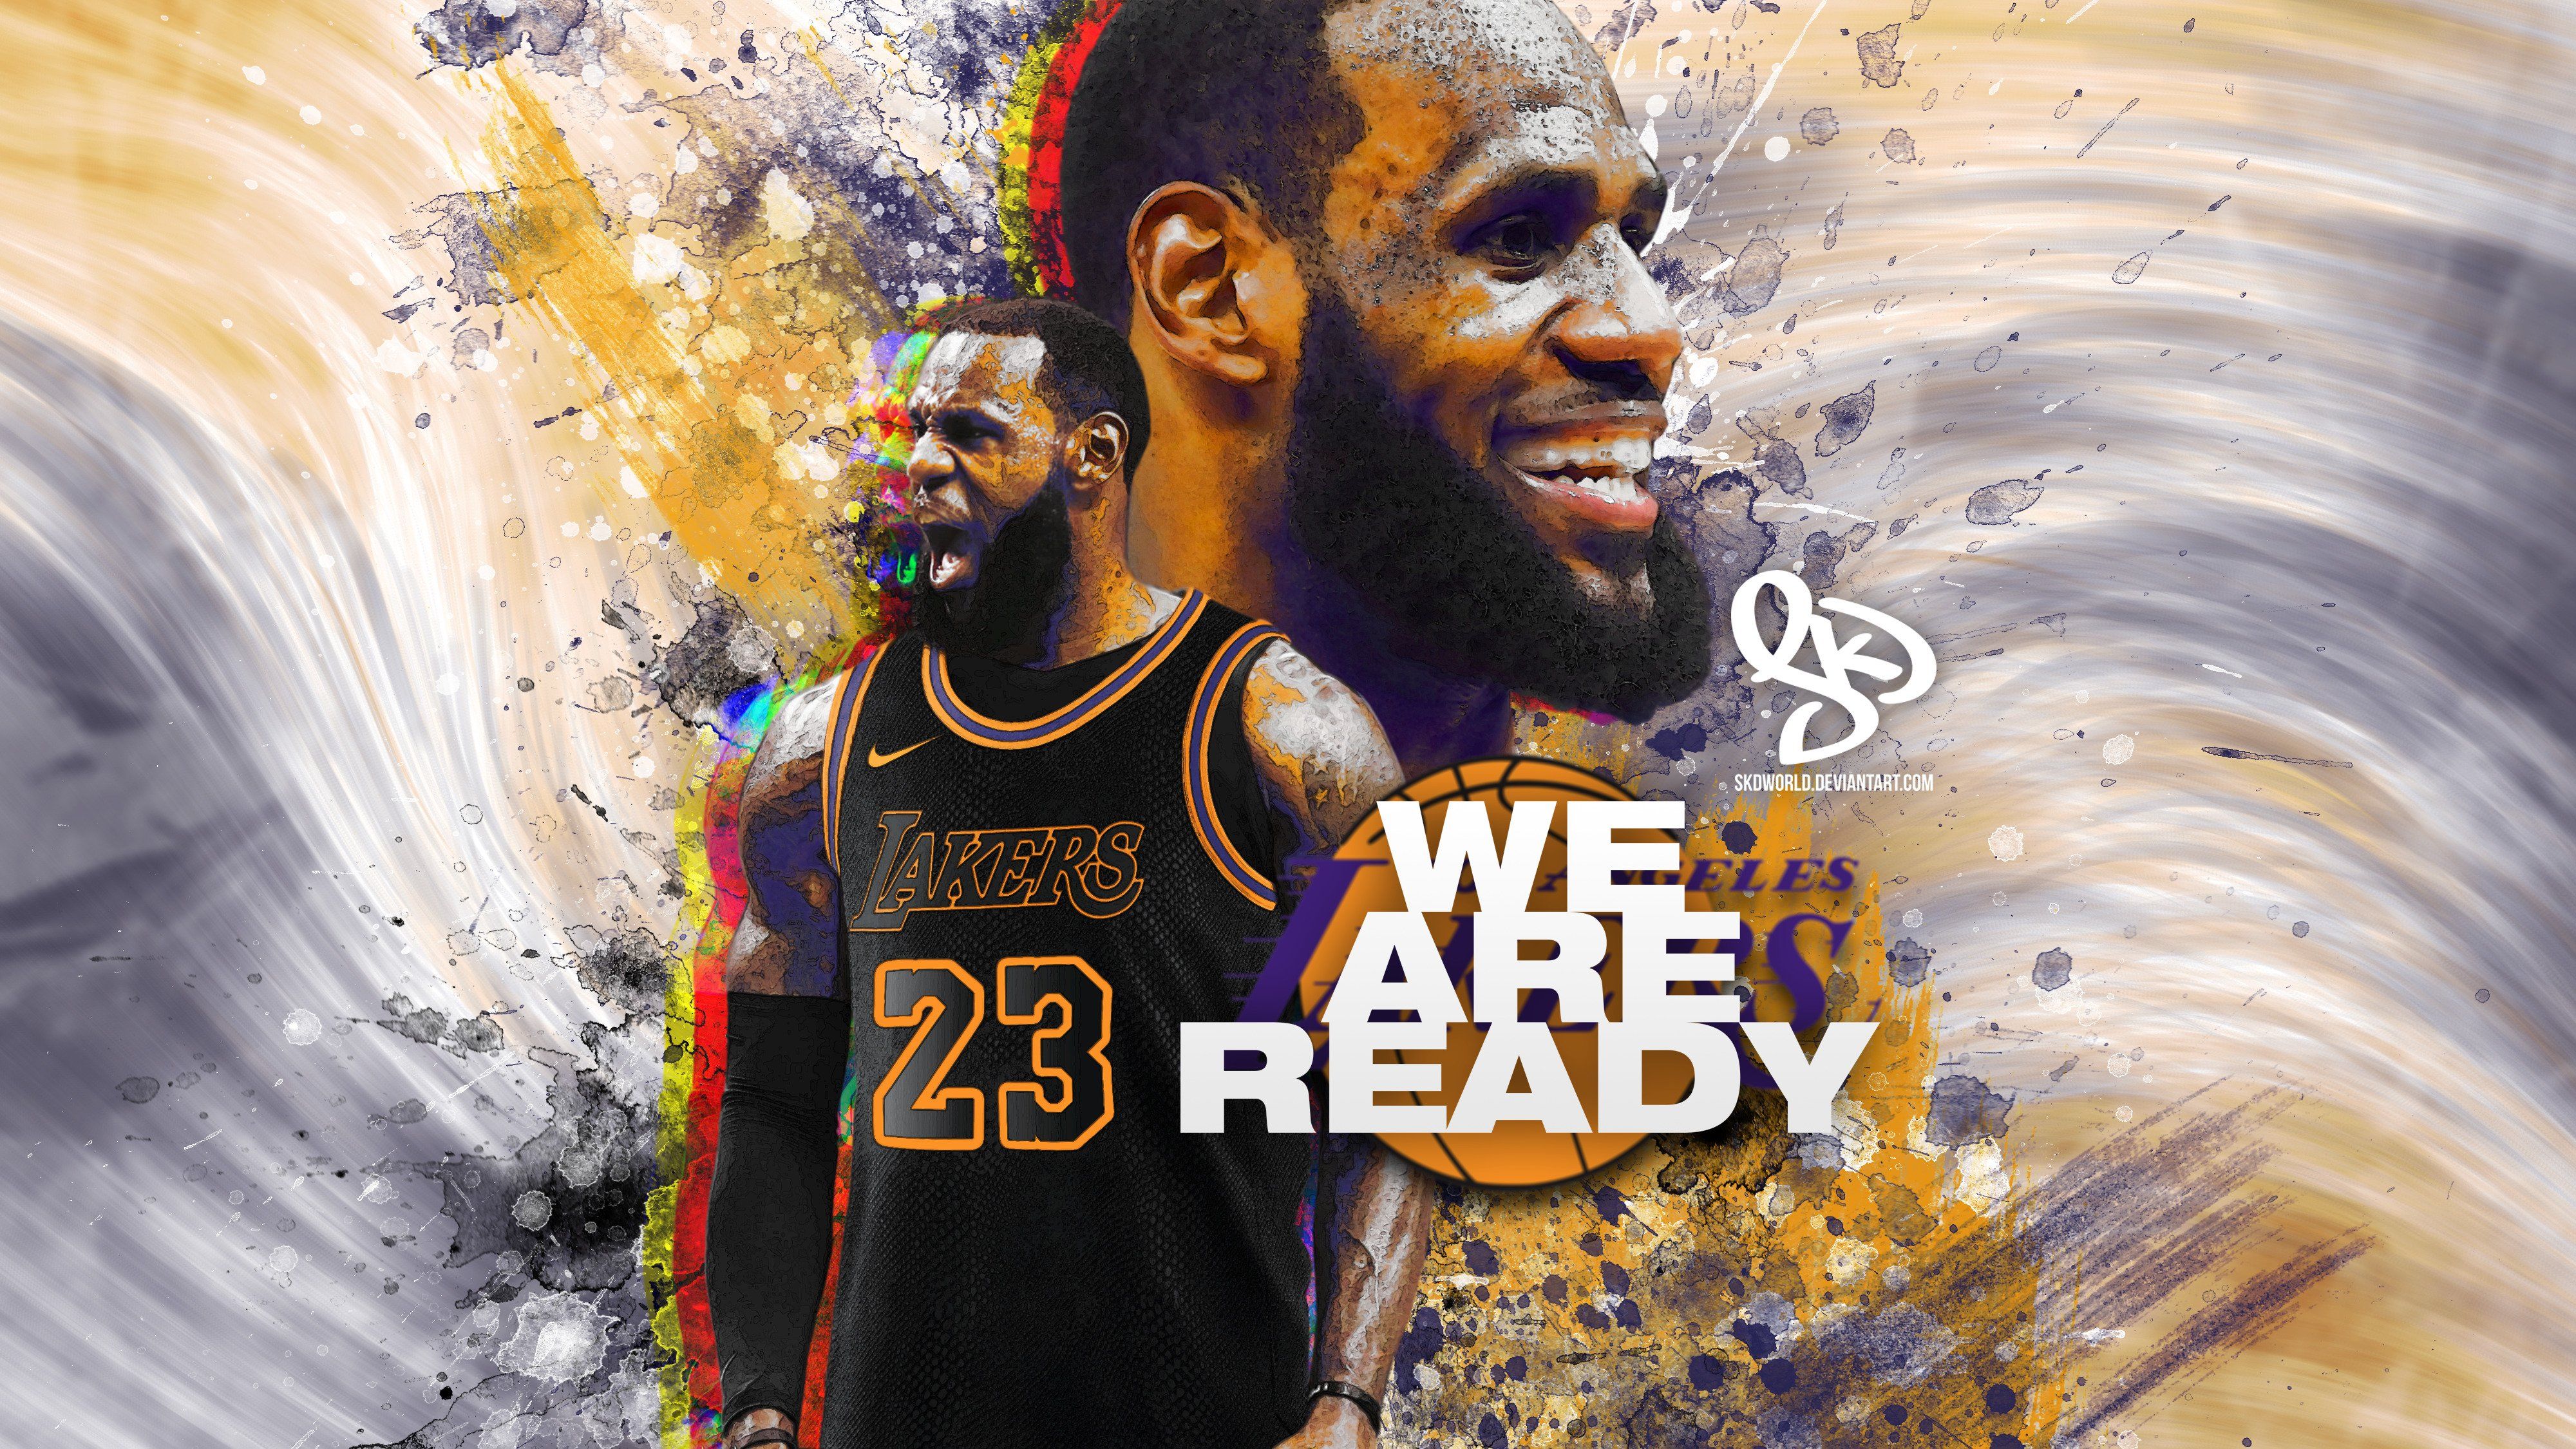 Cool Lakers Wallpapers